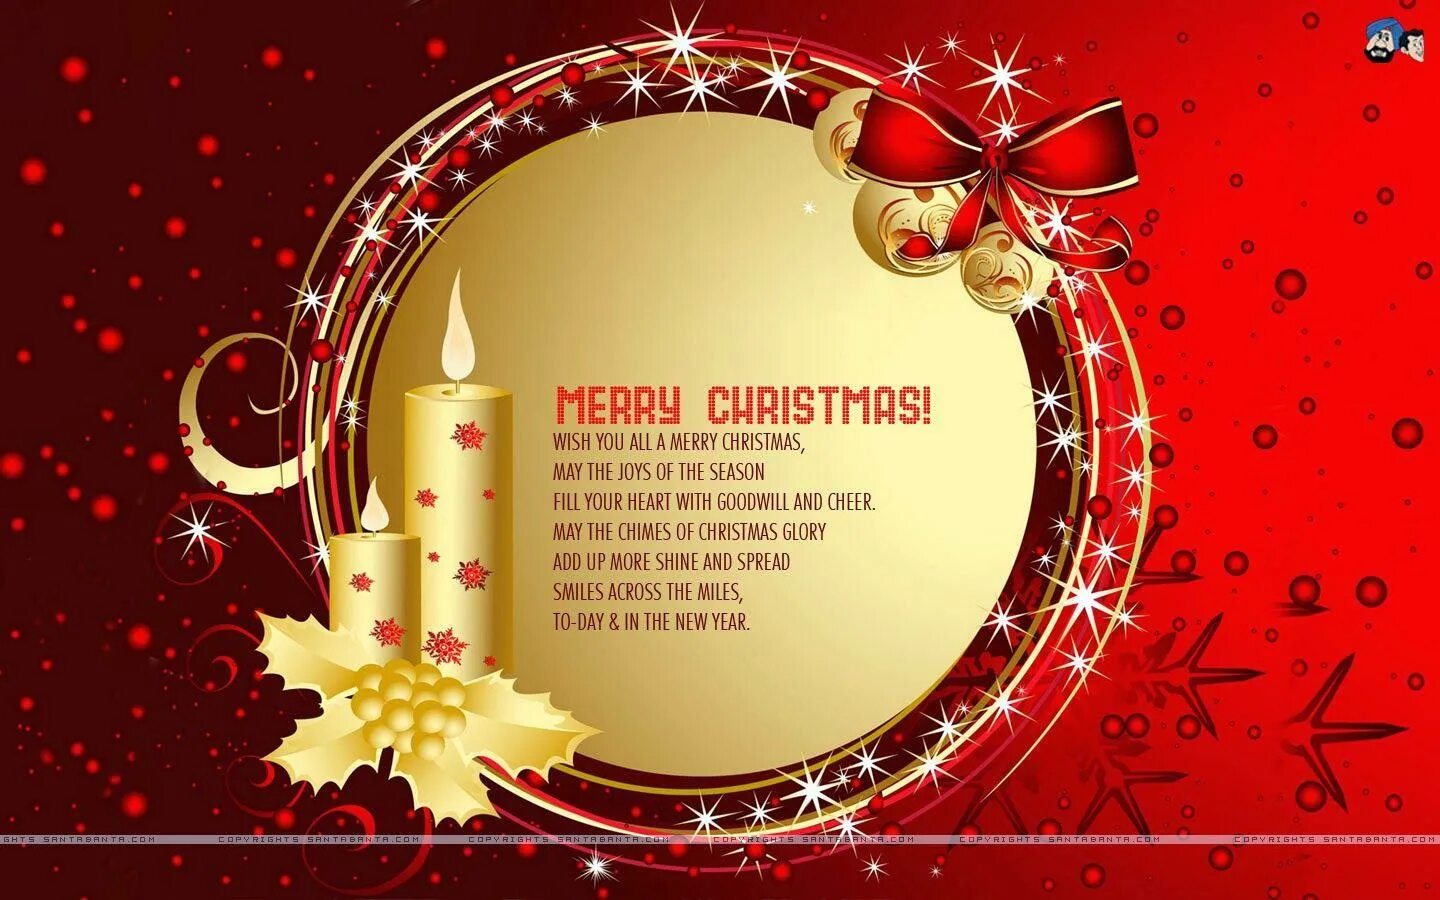 Christmas Wishes. Merry Christmas карточки. Merry Christmas Wishes. Merry Christmas wishing. Happy christmas be